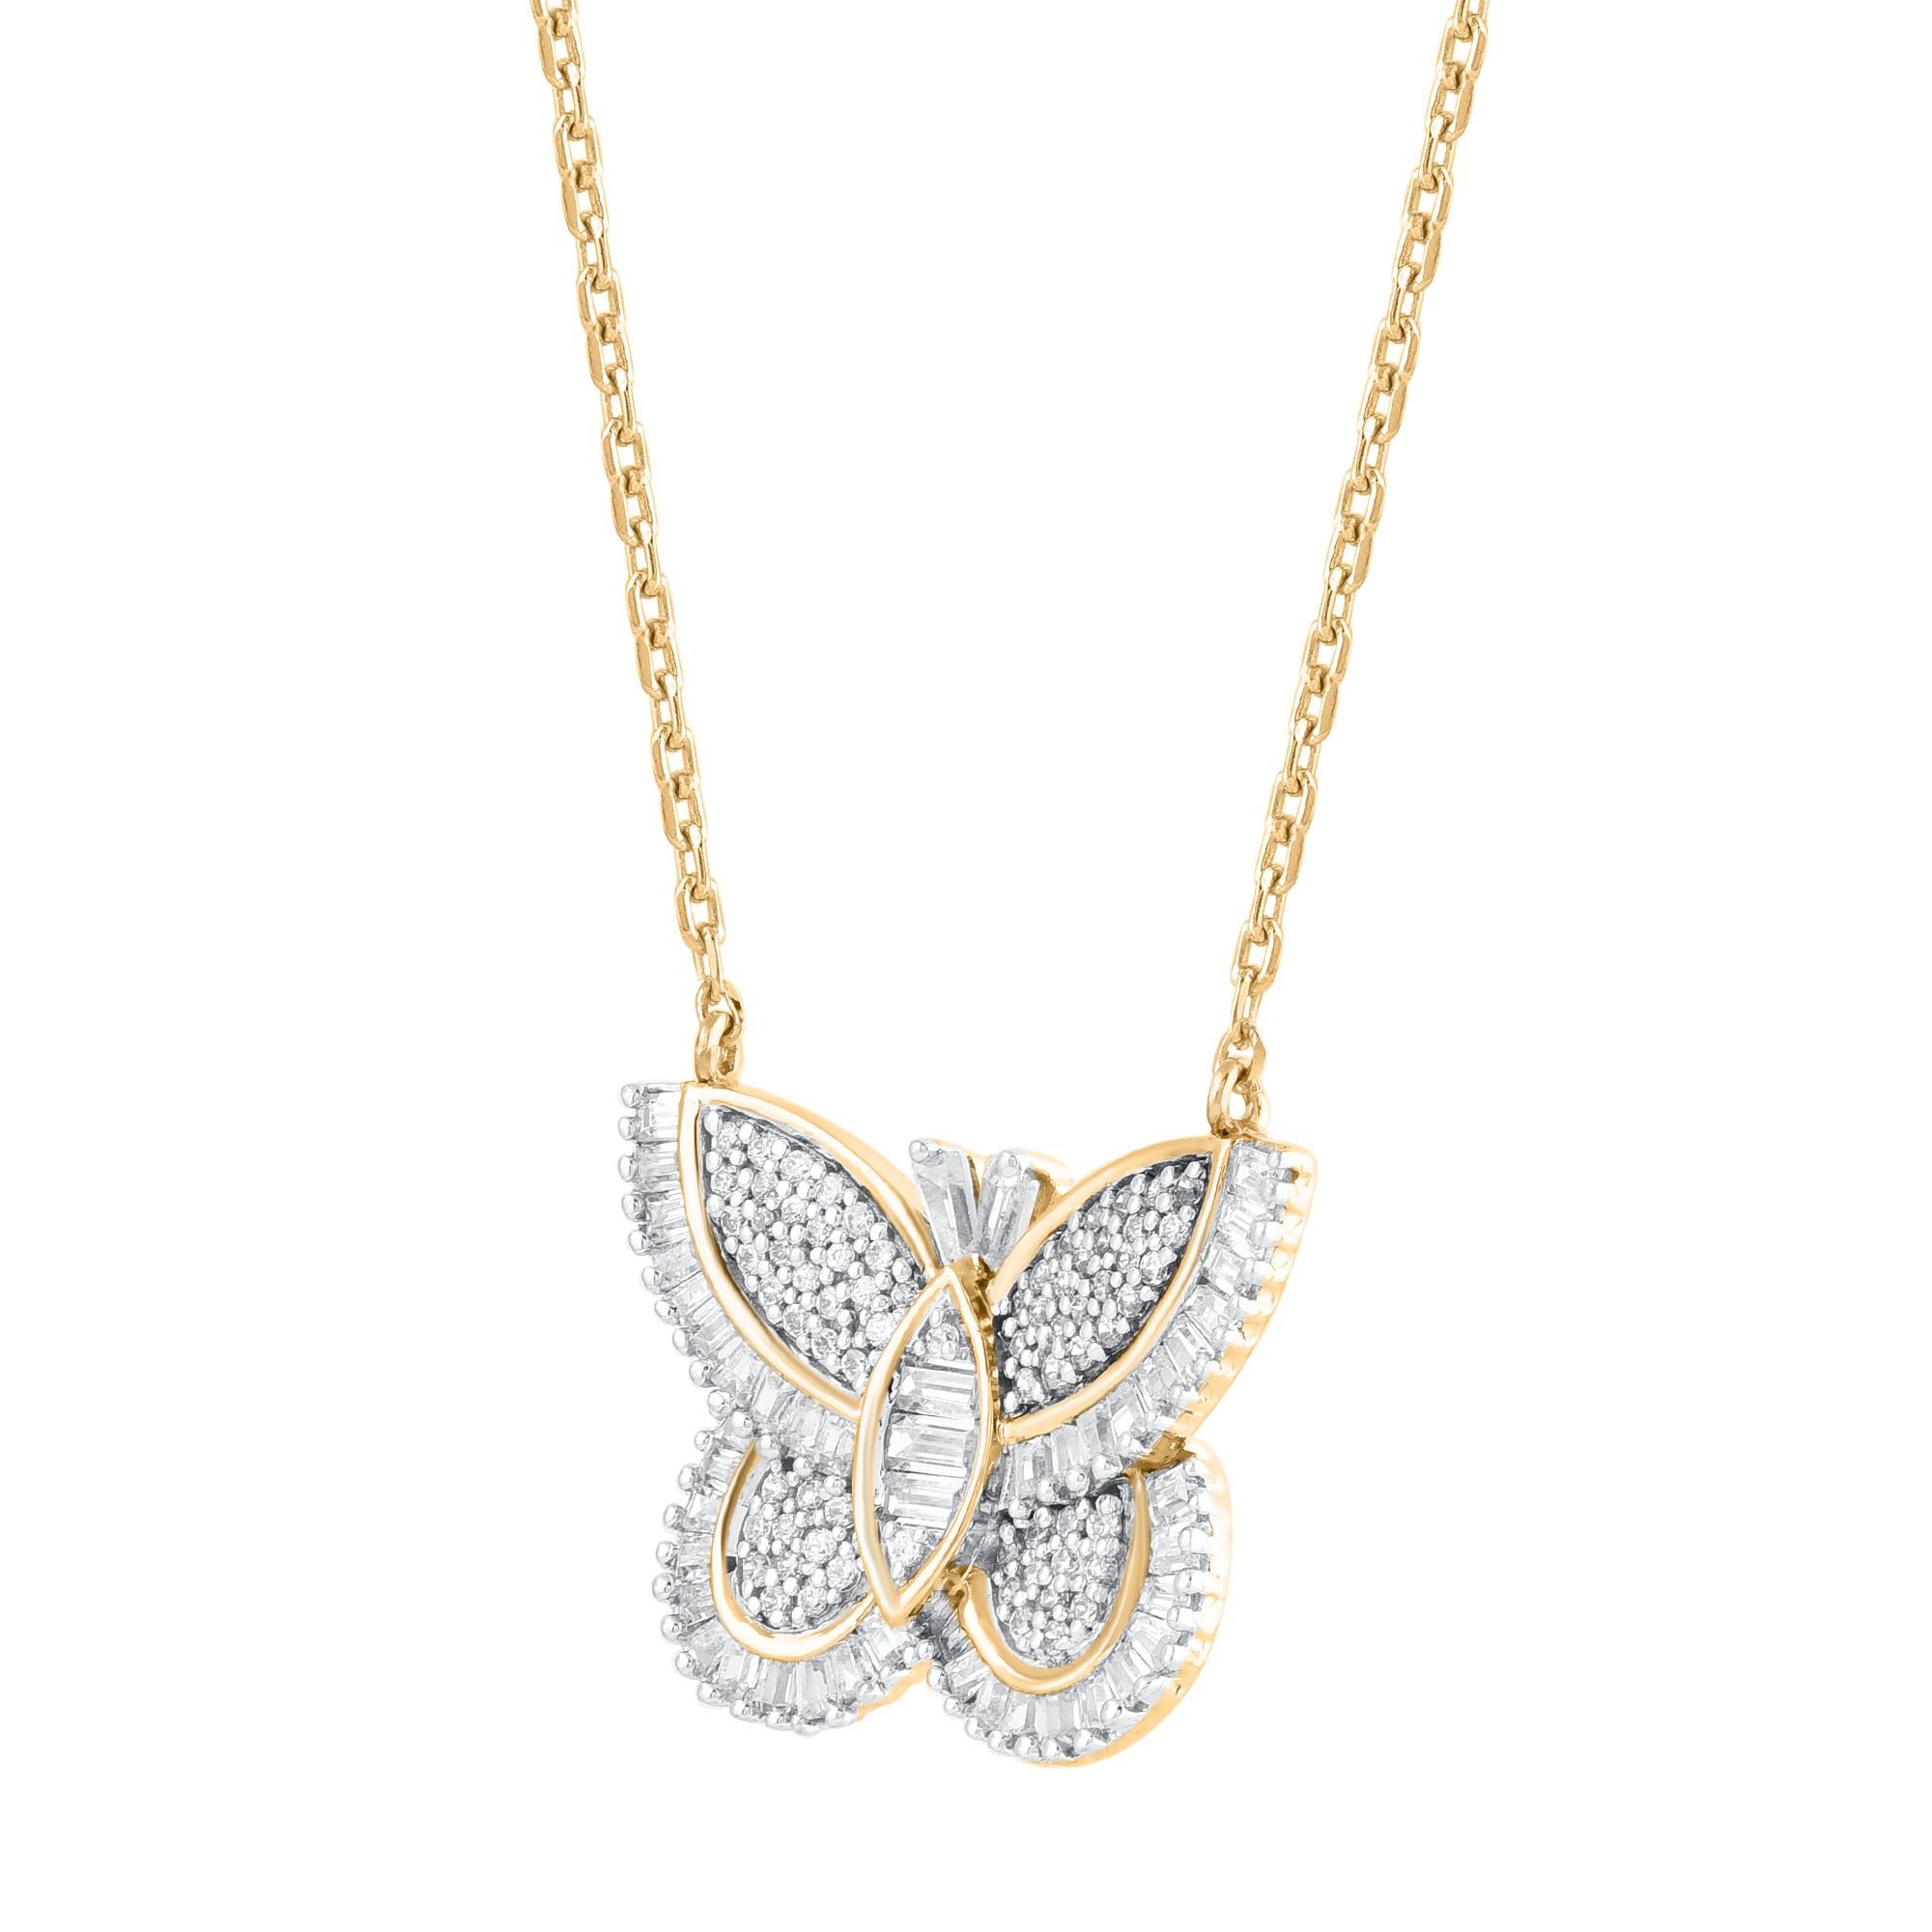 This diamond butterfly pendant necklace fits any occasion with ease. These pendants are studded with 139 single cut & baguette natural diamonds in pave & channel setting in 14kt yellow gold. Diamonds are graded as H-I color and I-2 clarity. Pendant